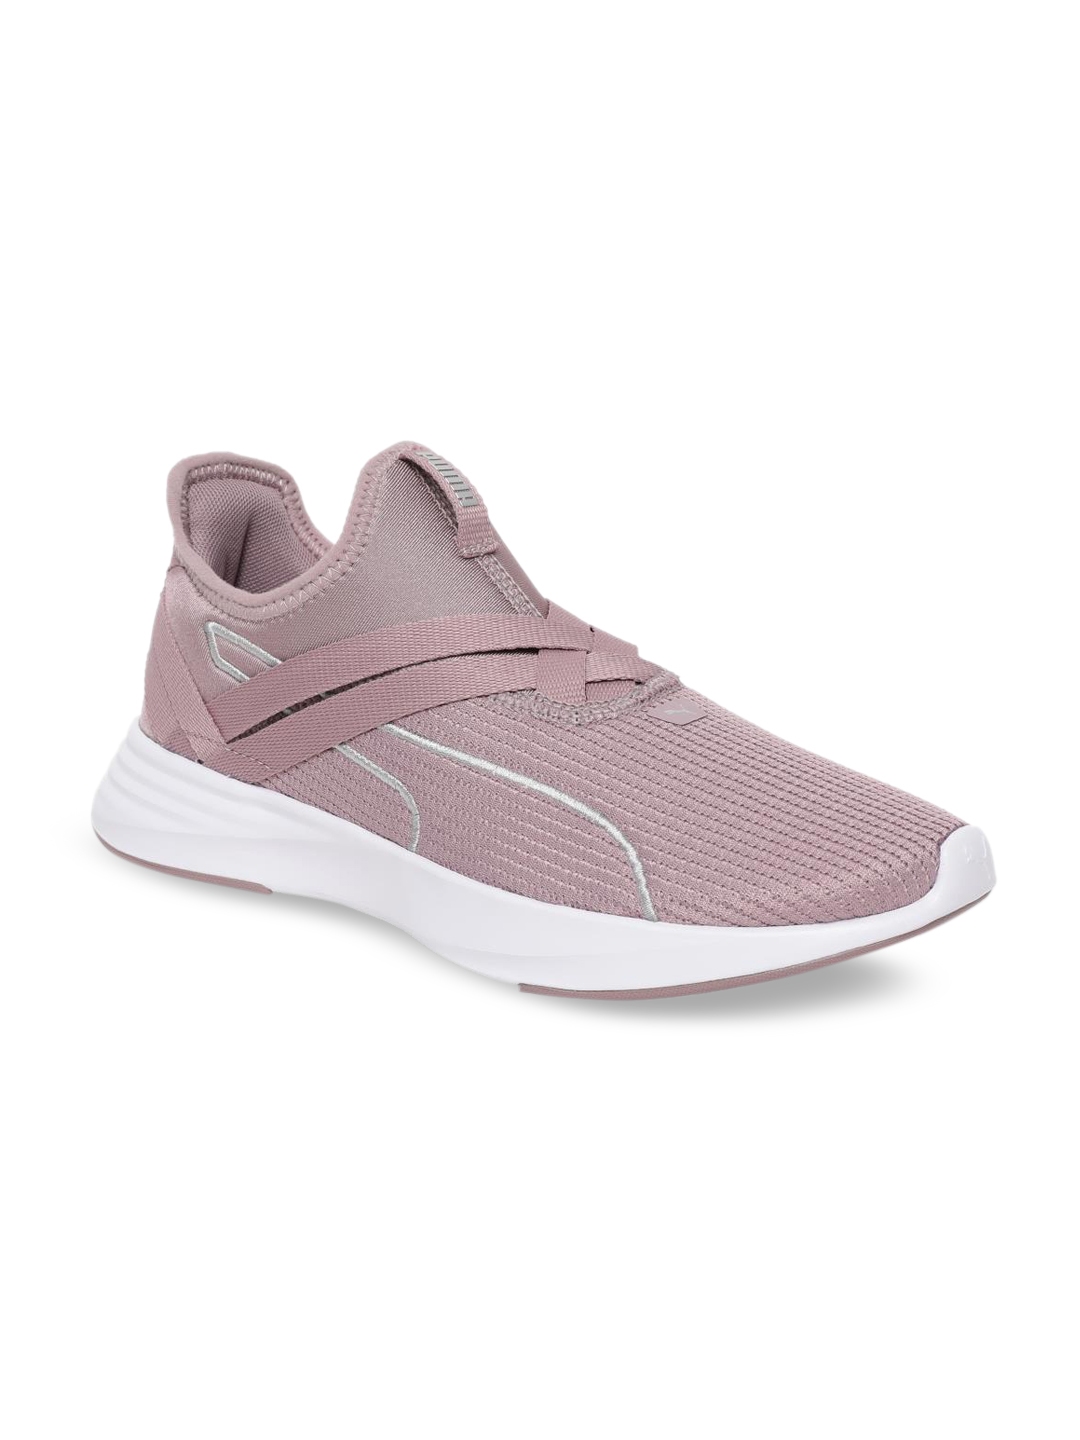 Buy Puma Women Pink Training Or Gym Shoes - Sports Shoes for Women ...